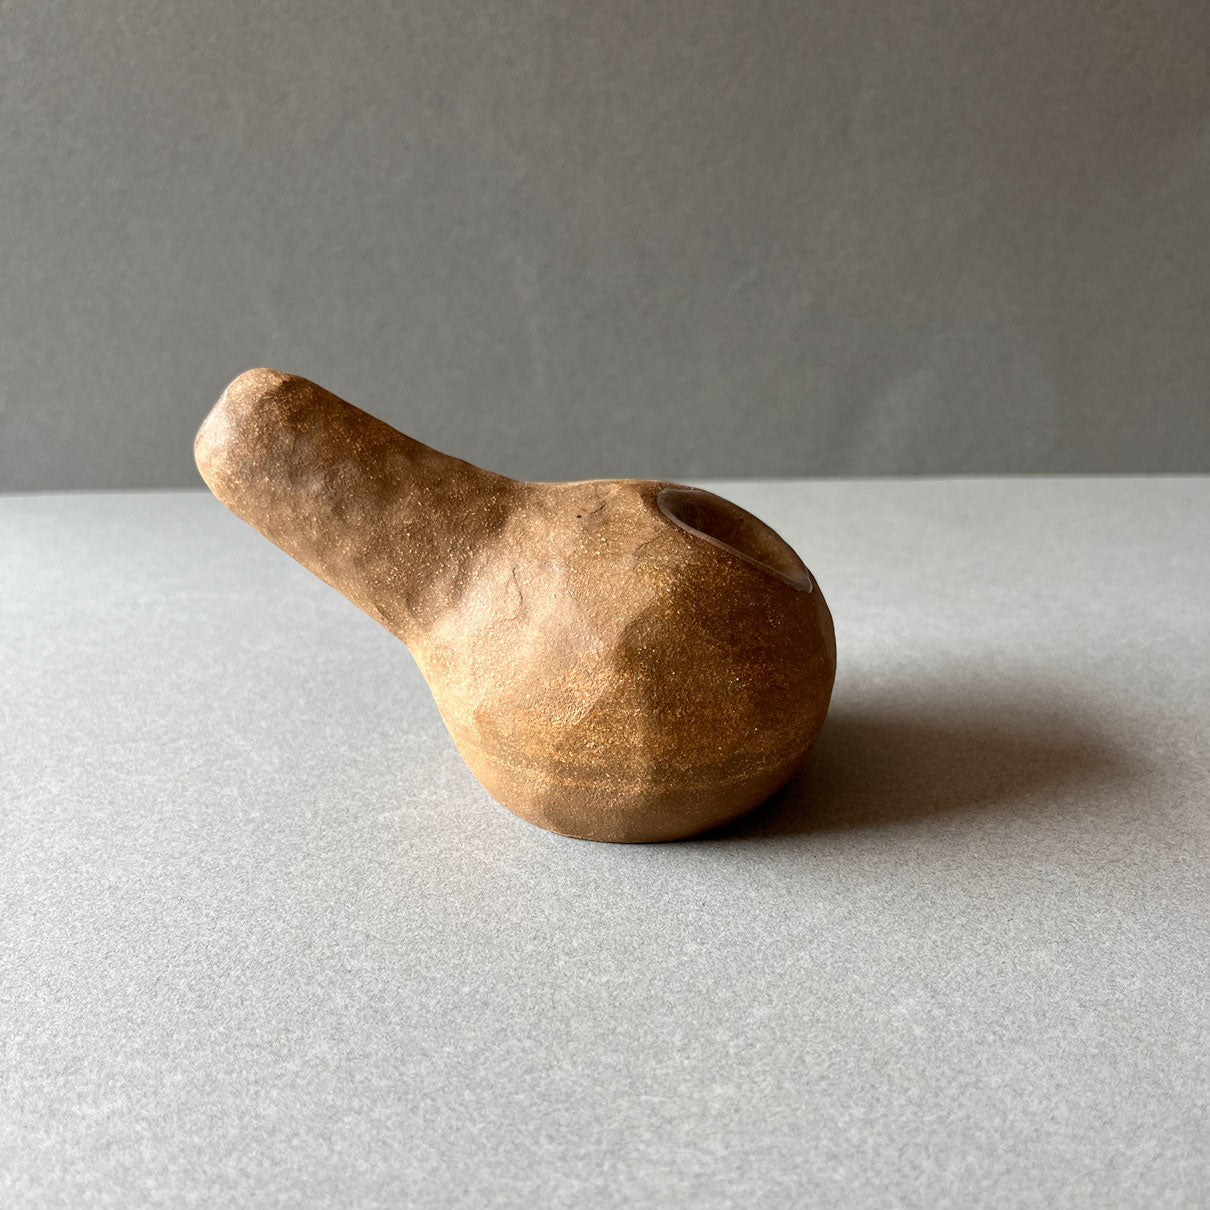 A gourd shaped, spherical body form in brown stoneware with hammered texture, featuring a large glazed inset bowl and rounded stem protrusion mouthpiece. 